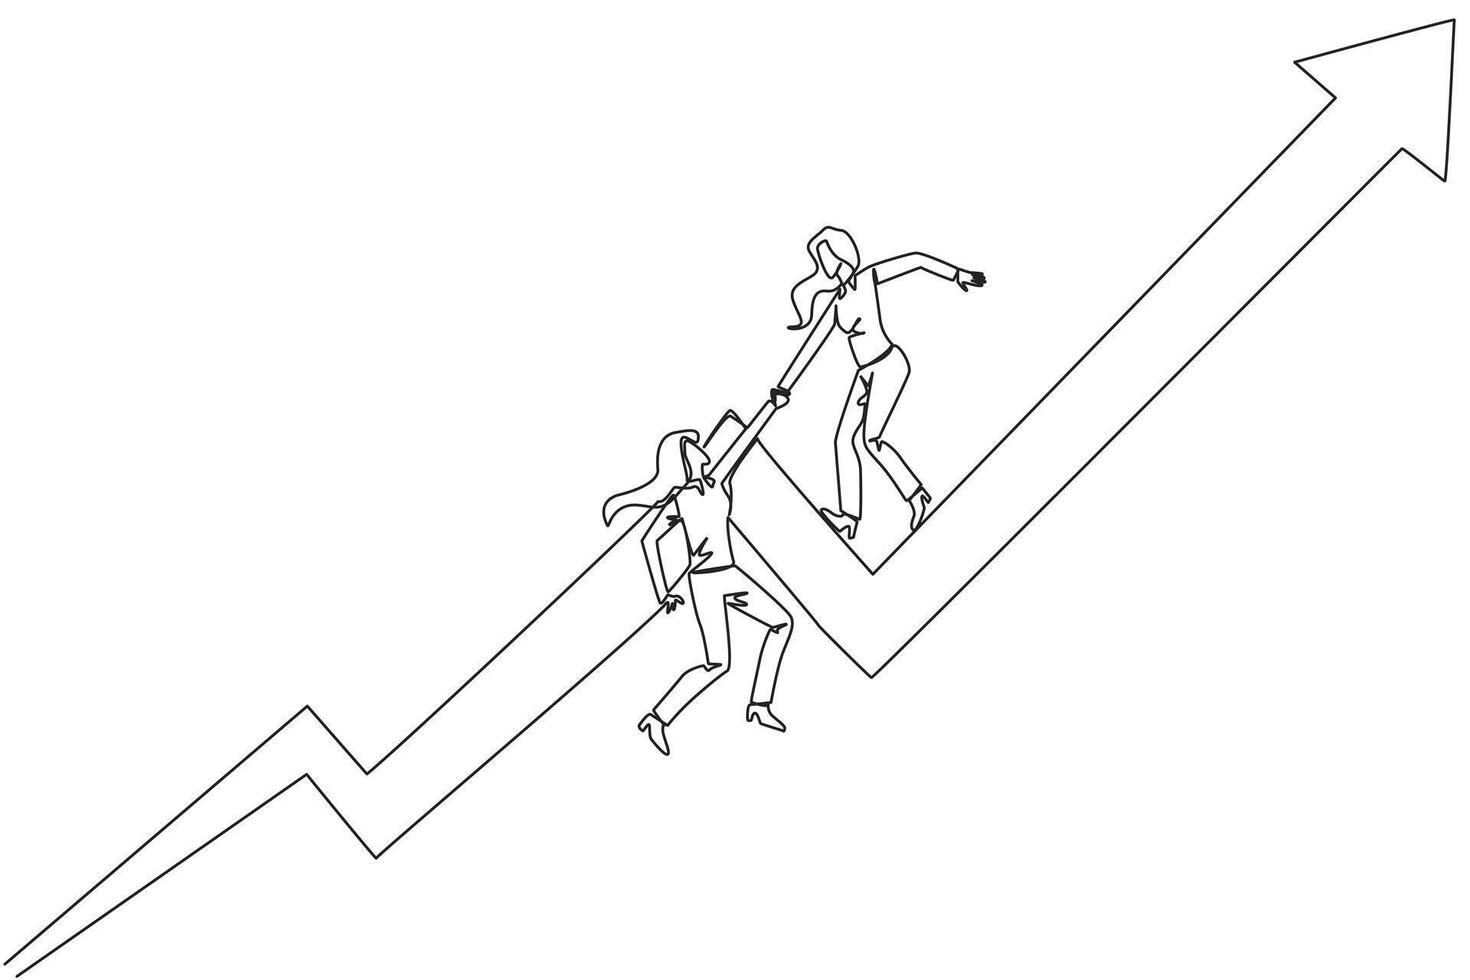 Single continuous line drawing businesswoman helps colleague to climb the rising arrow symbol. Help each other to achieve satisfactory targets. Grow together. One line design illustration vector